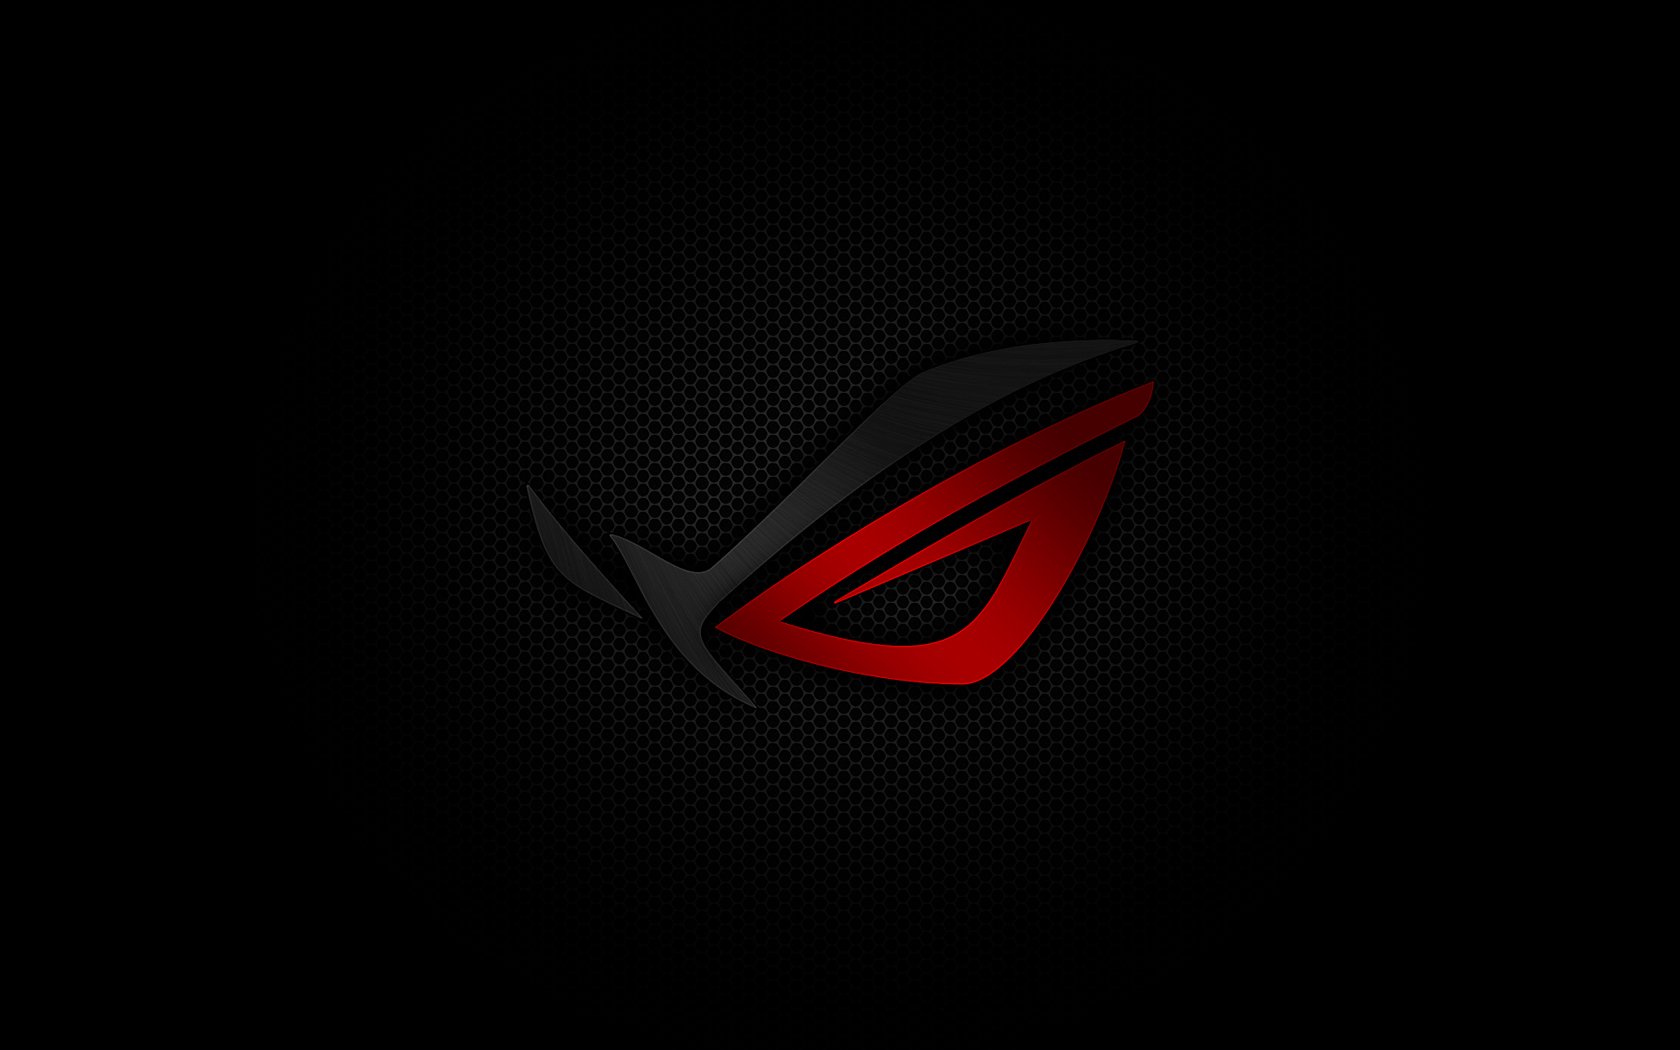 ASUS ROG Wallpaper Pack by BlaCkOuT1911 1680x1050